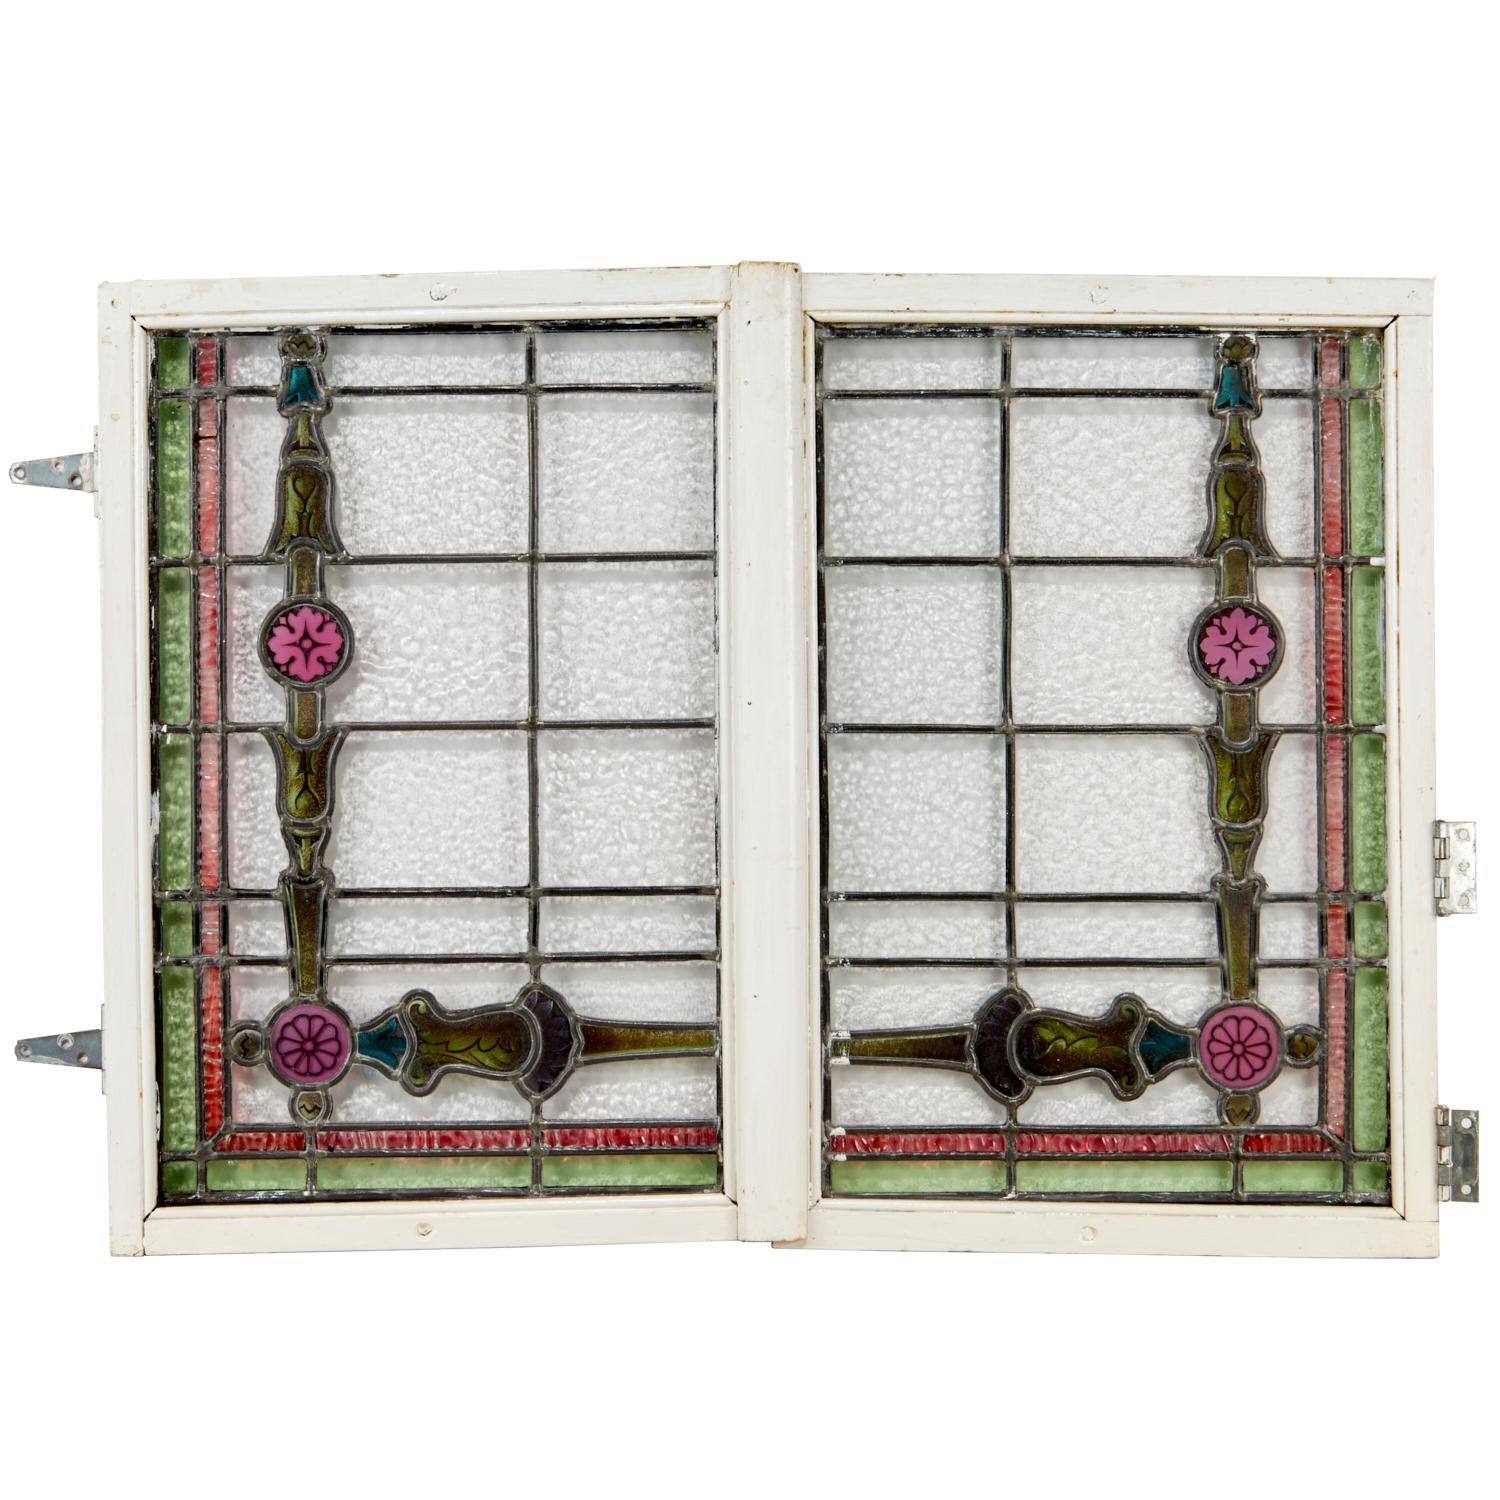 Unknown Early 20th C. Matched Pair of Stained Glass and Leaded Windows